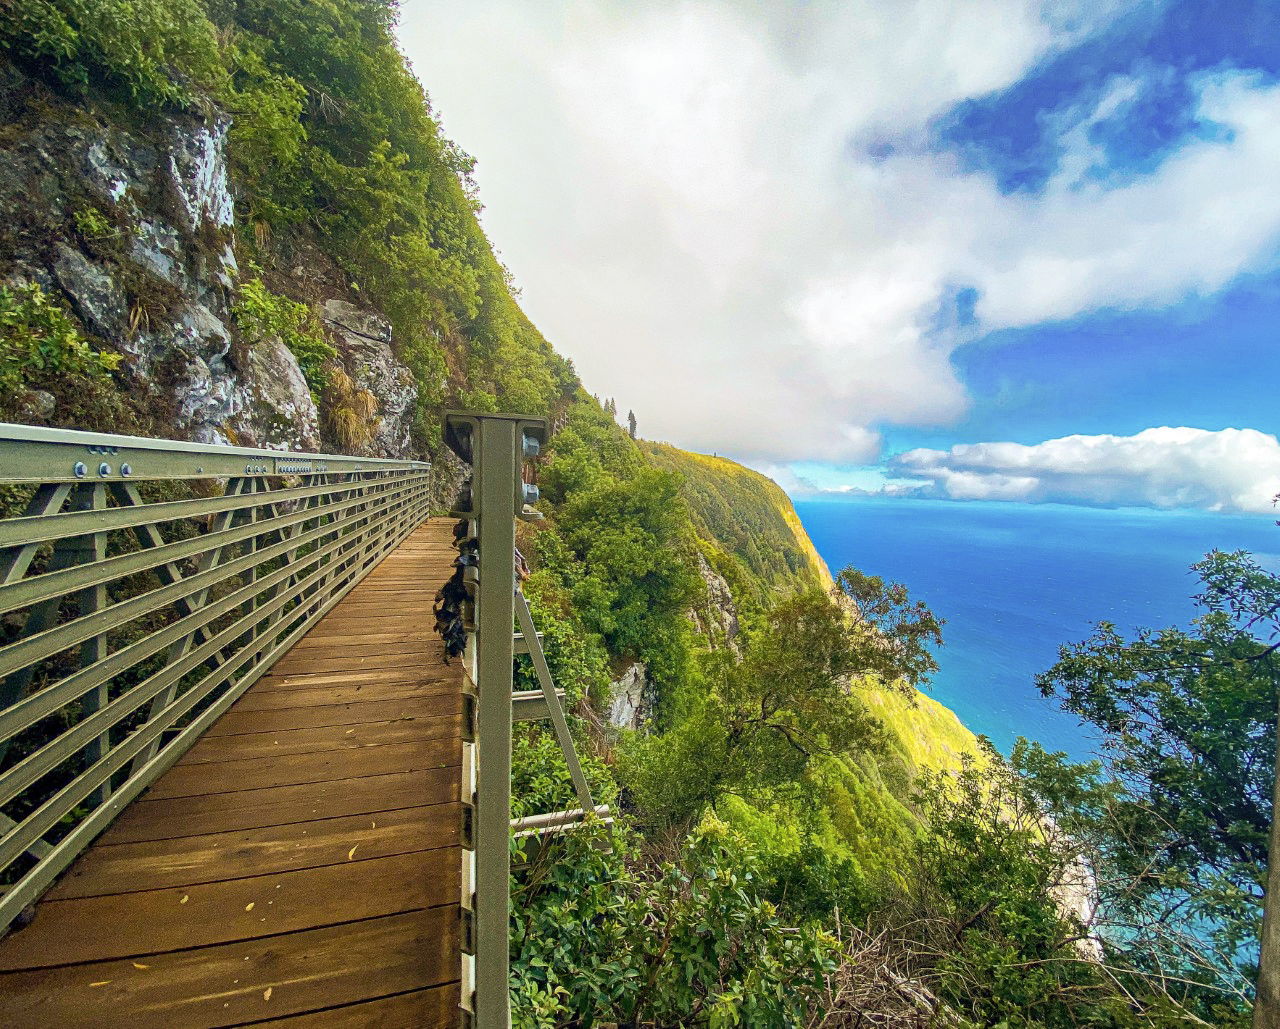 A bridge on the face of a steep cliff